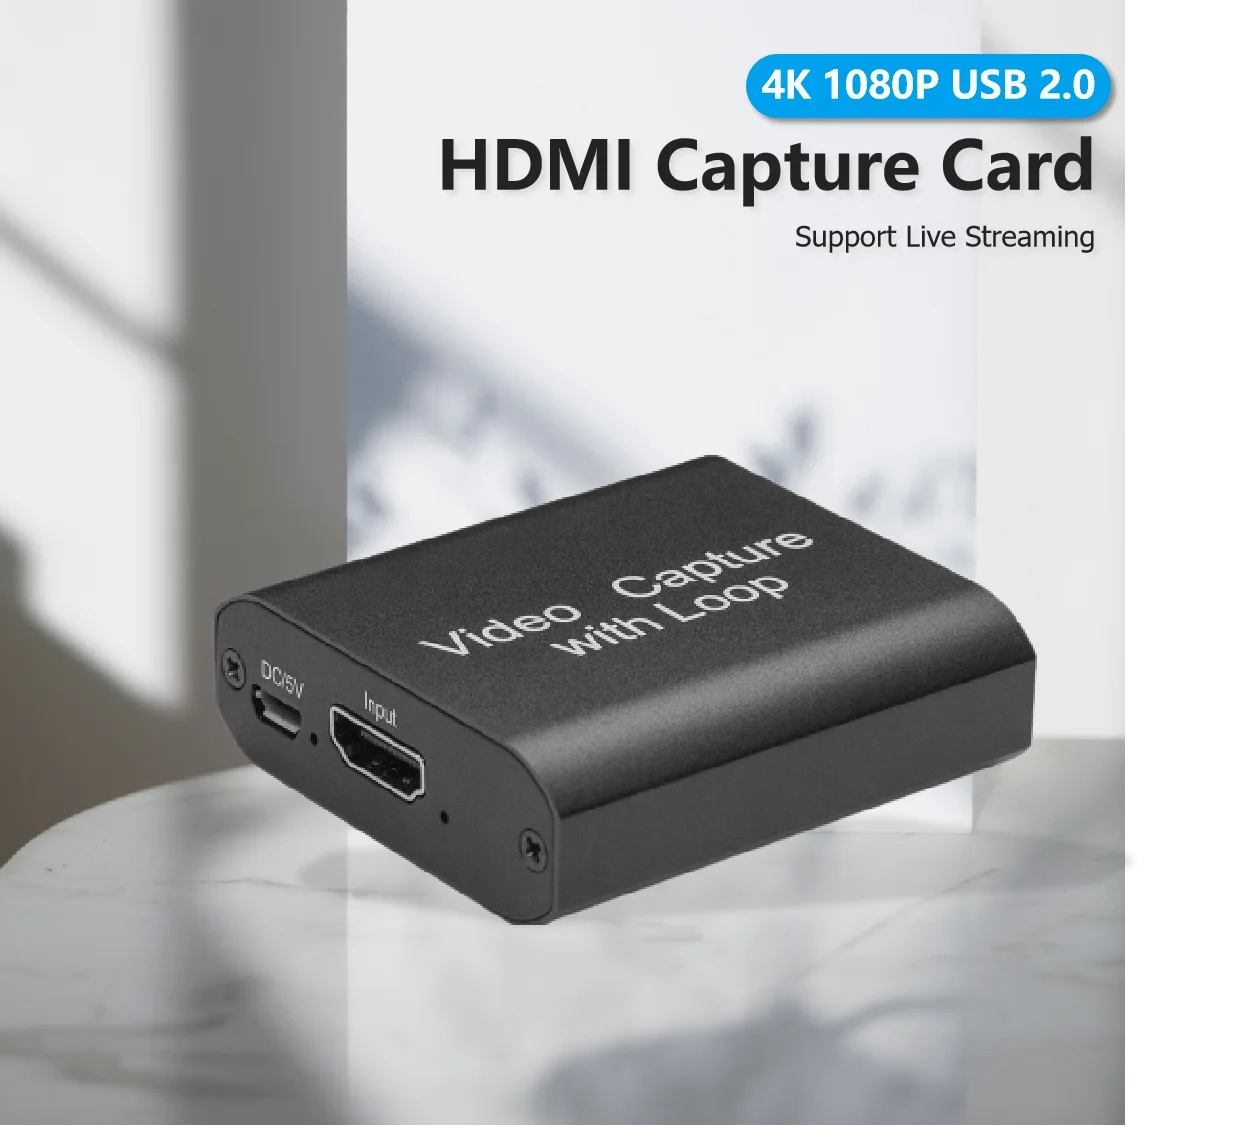 

HDMI-compatible USB 2.0 Video Capture Card 4K 1080P HD Video Recorder Grabber For OBS Capturing Game Live Streaming For PC TV